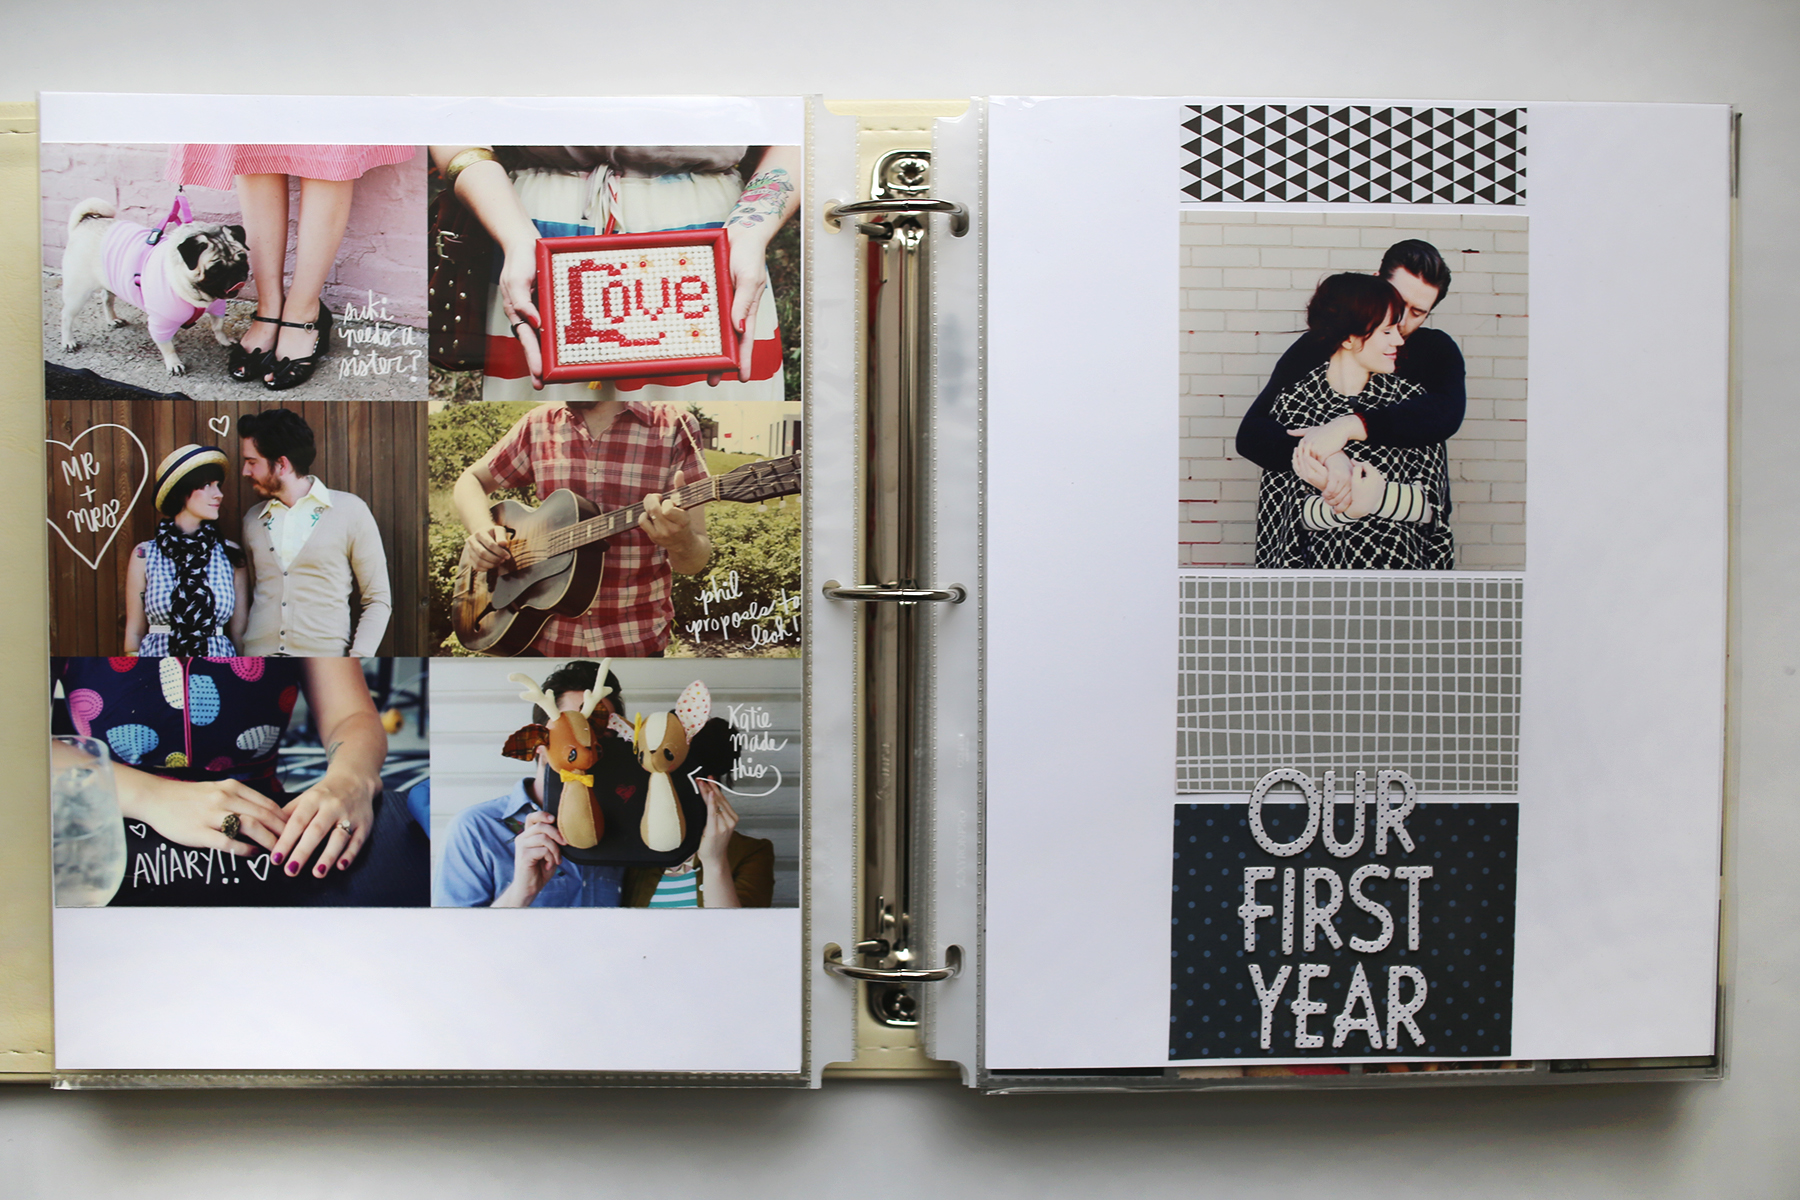 5 Simple and Easy Scrapbooking Ideas! - A Beautiful Mess